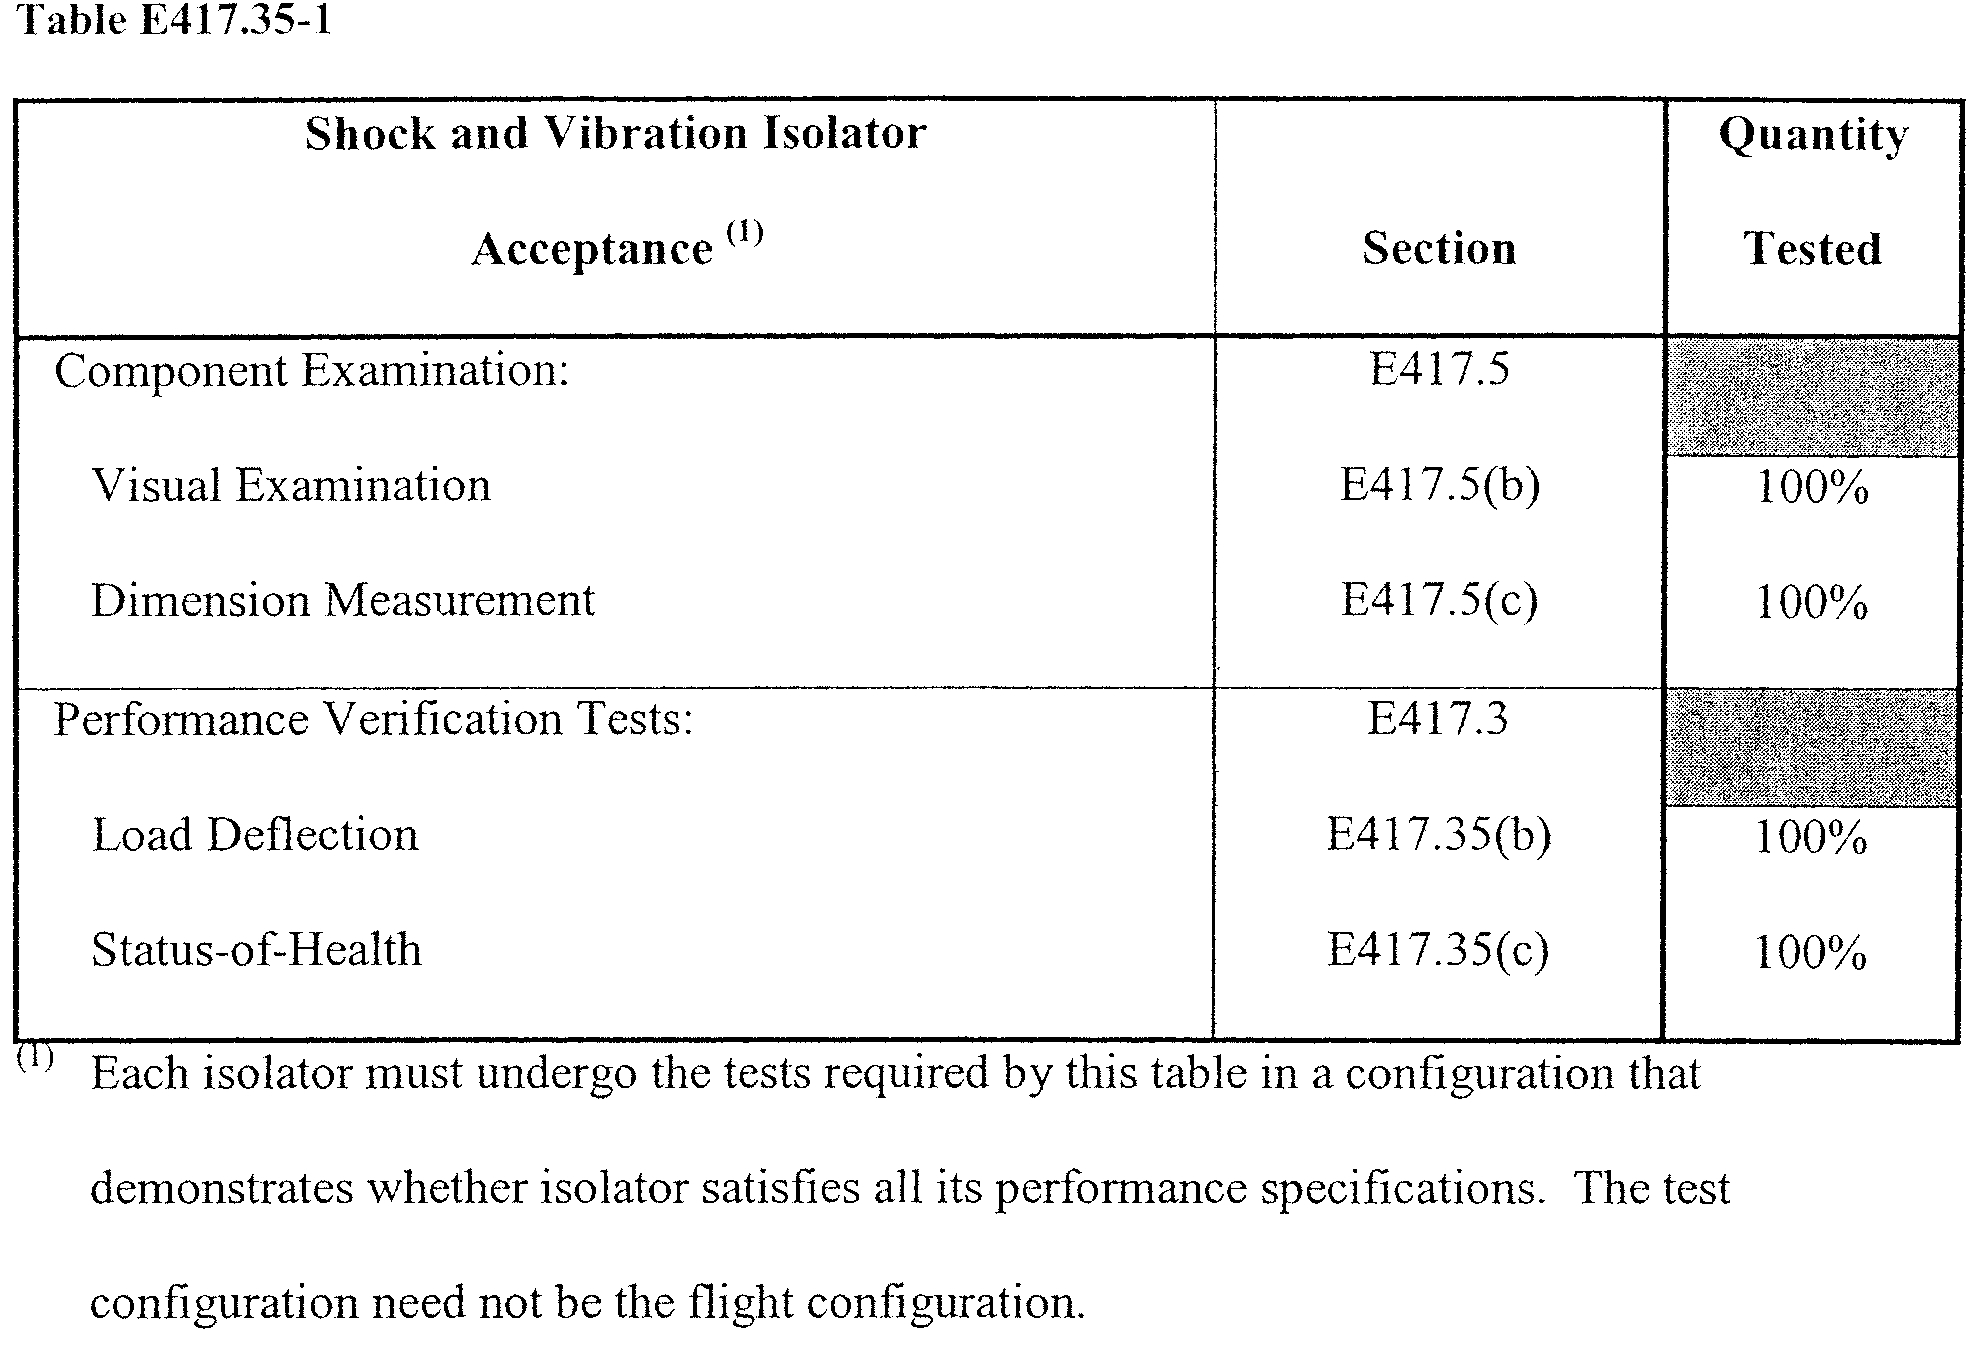 Graphic of (a) General. This section applies to any shock or vibration isolator that is part of a flight termination system. Any isolator must satisfy each test or analysis identified by table E417.35-1 to demonstrate that it has repeatable performance and is free of any workmanship defects.